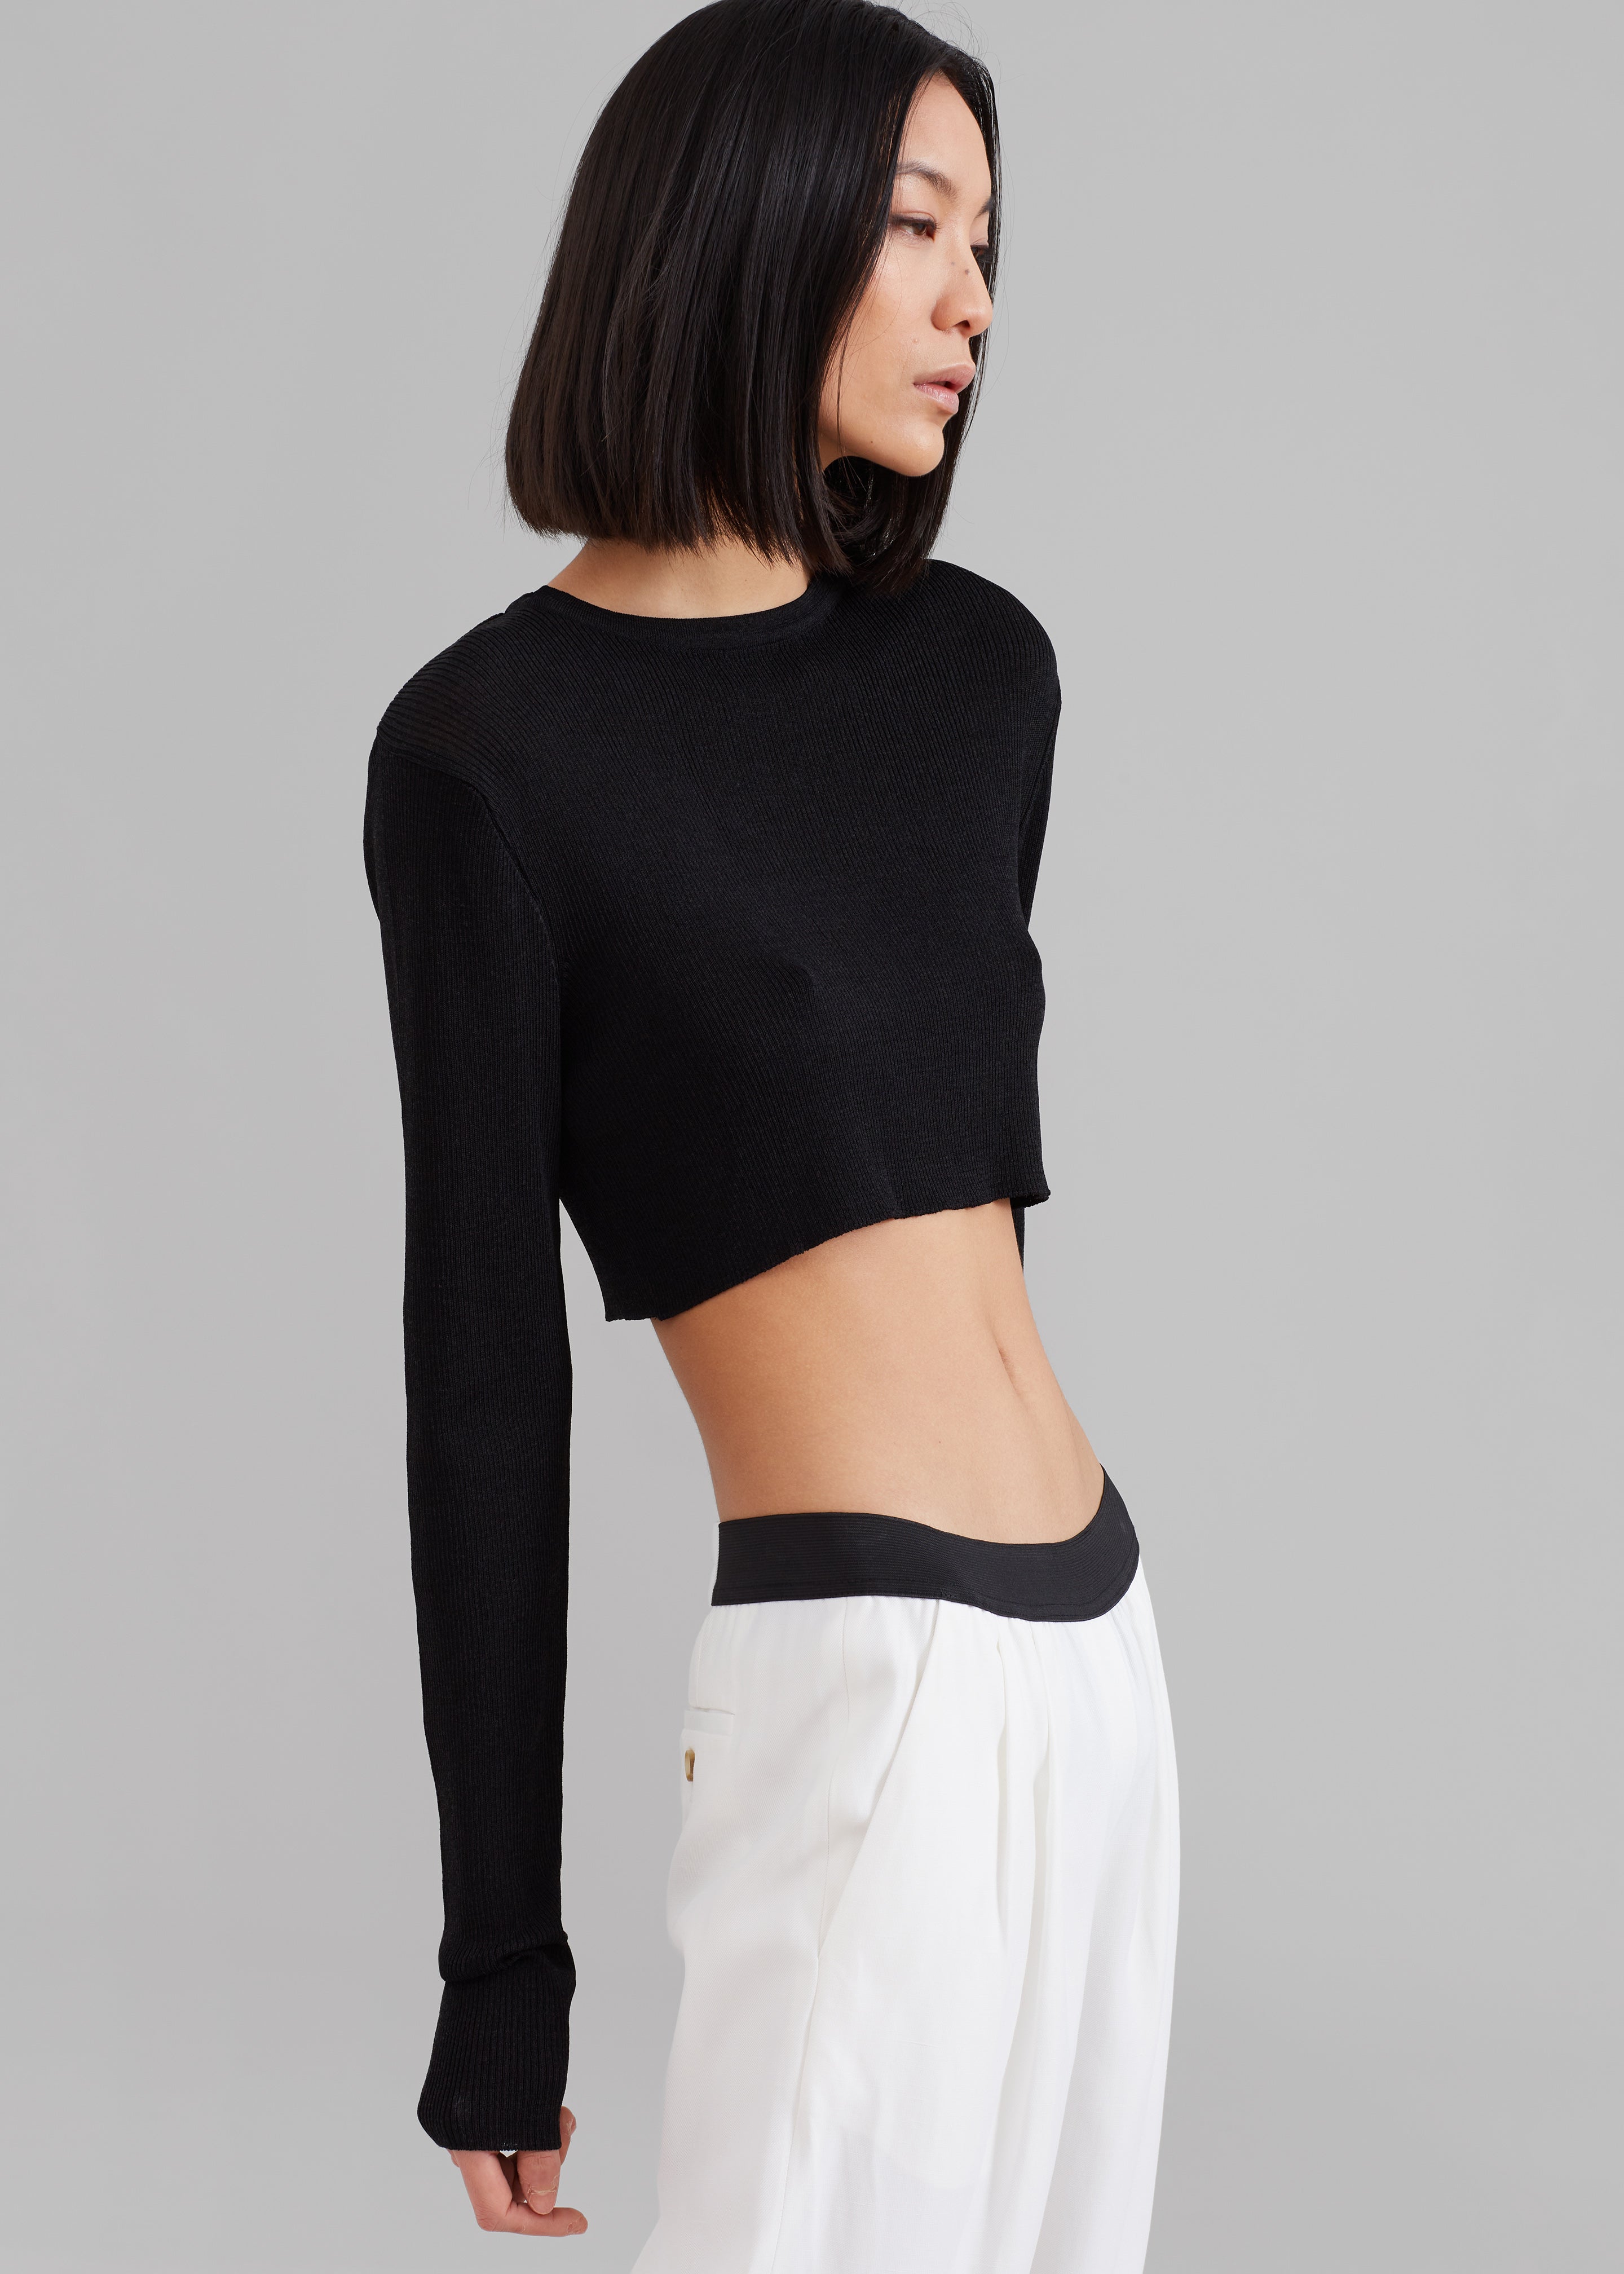 Women's Knitted Tops – The Frankie Shop